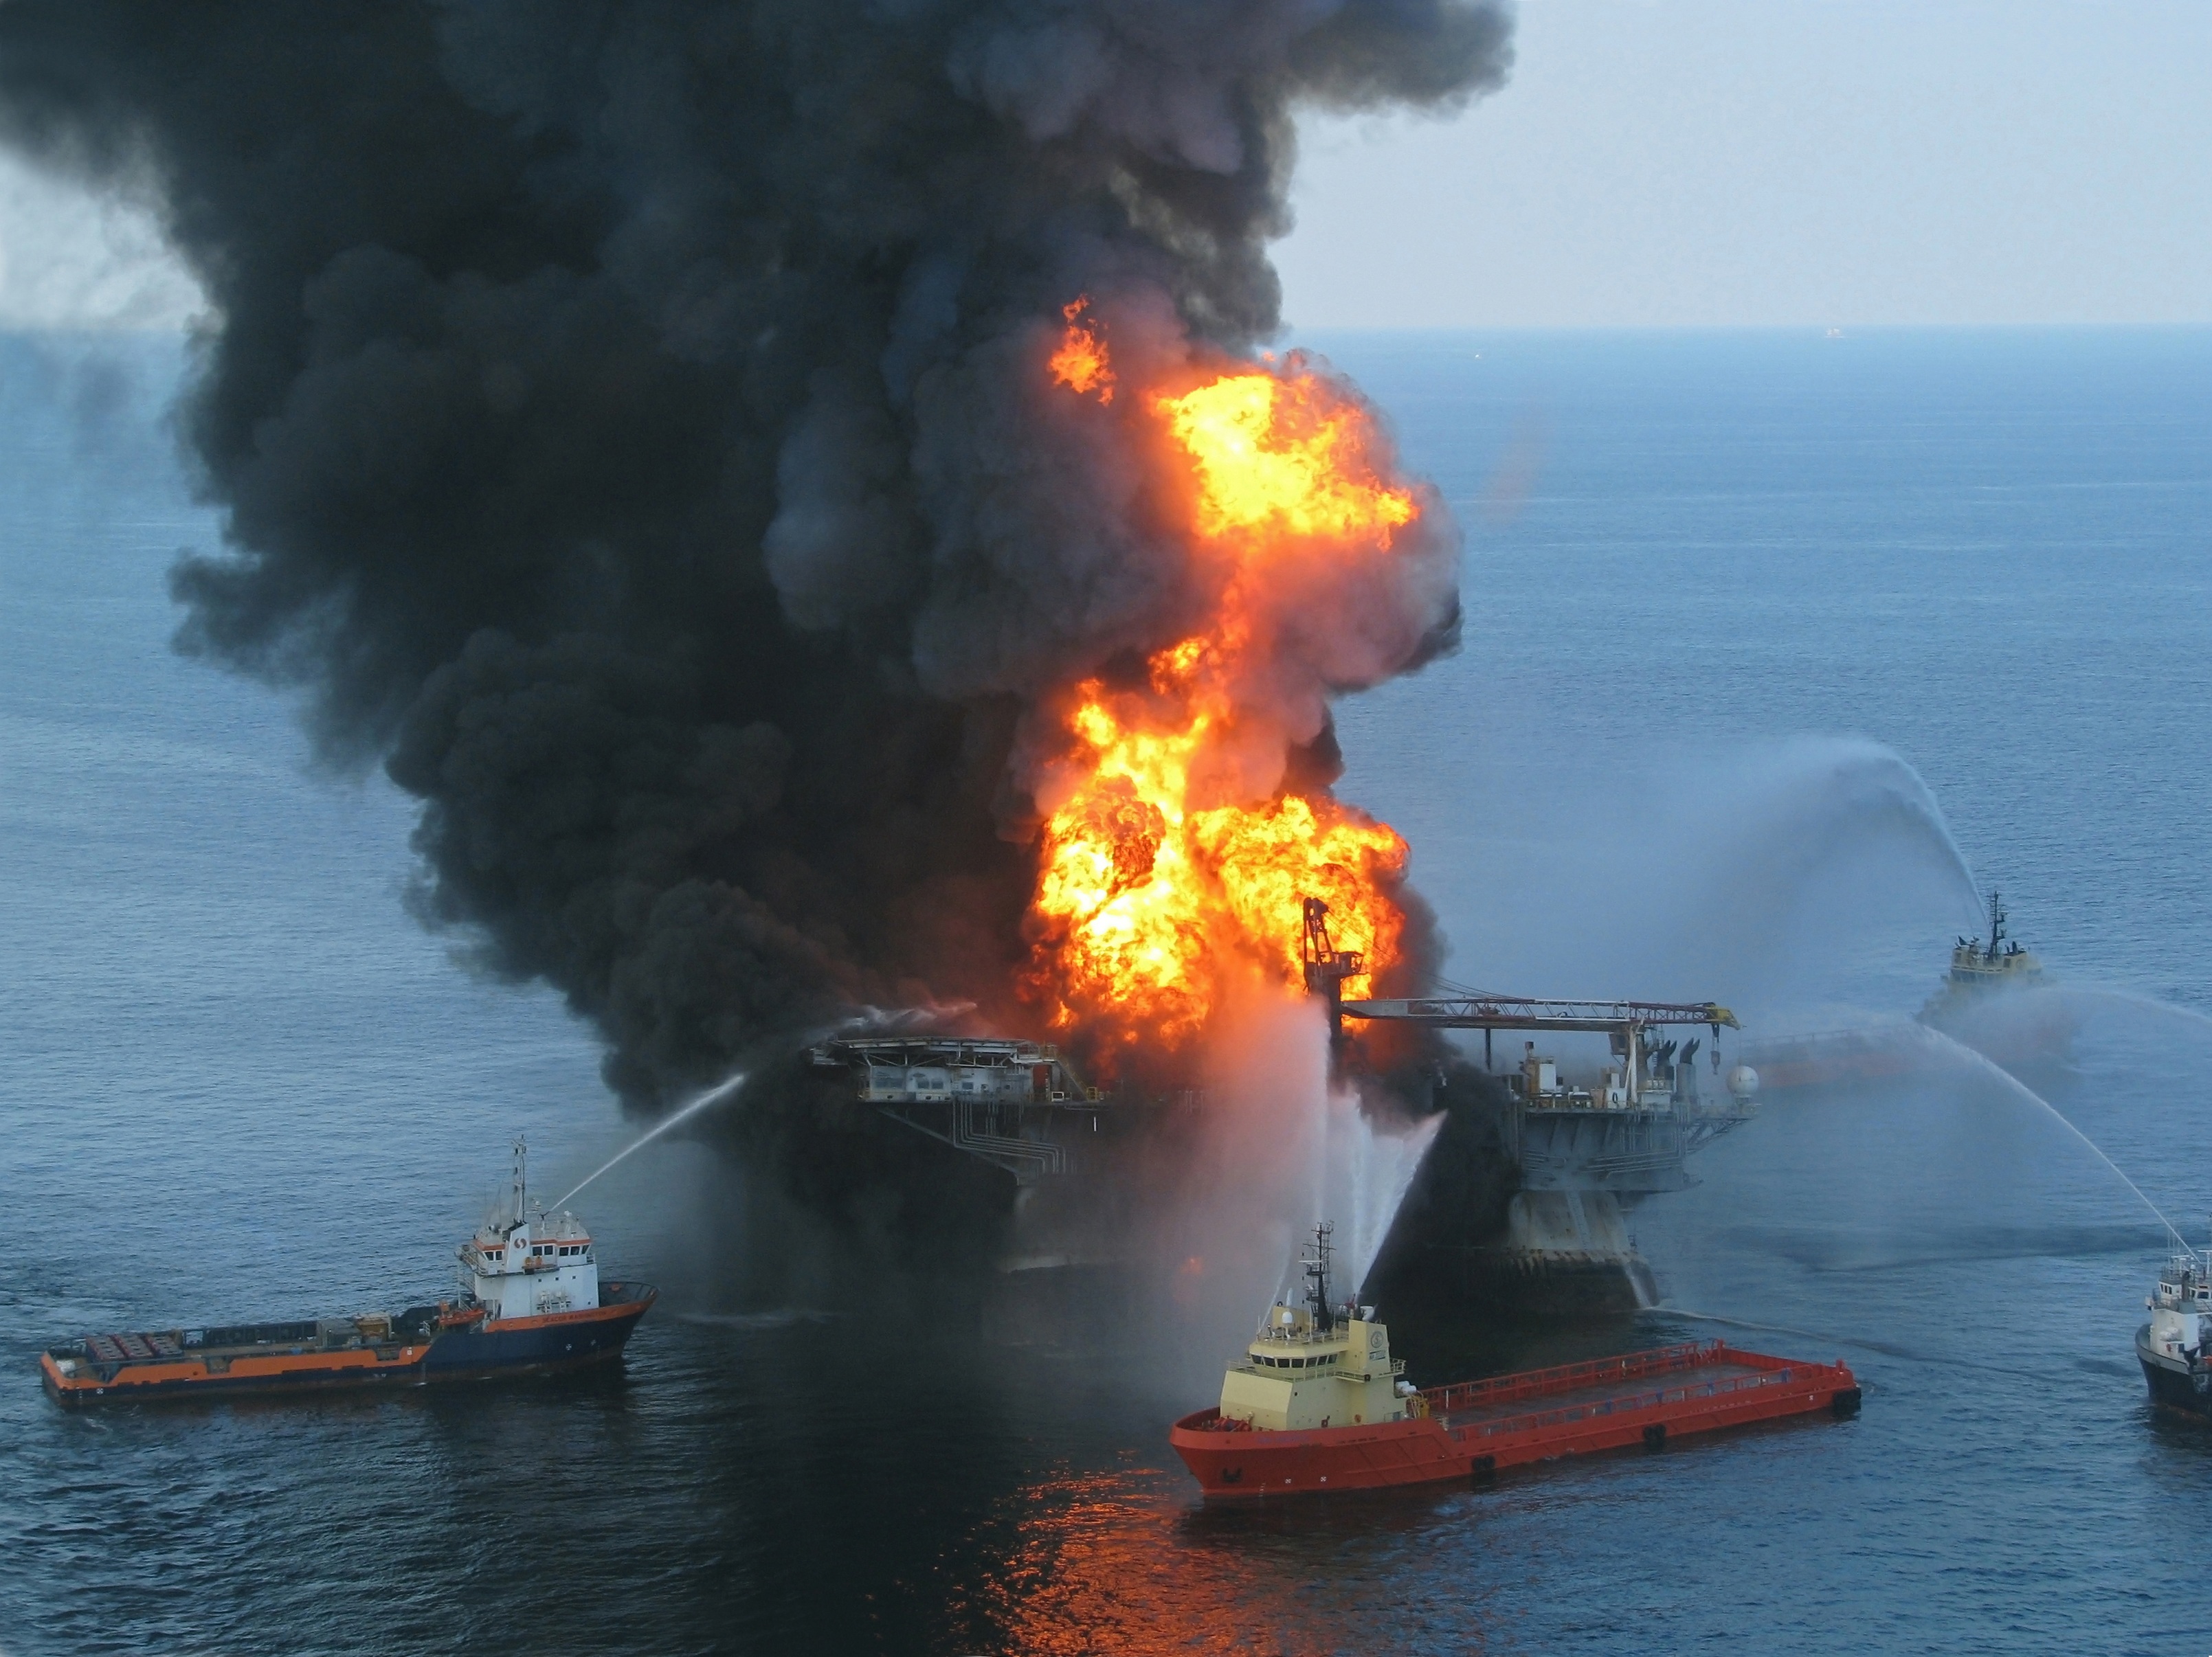 Oil Rig Explosion and fireboats by skeeze